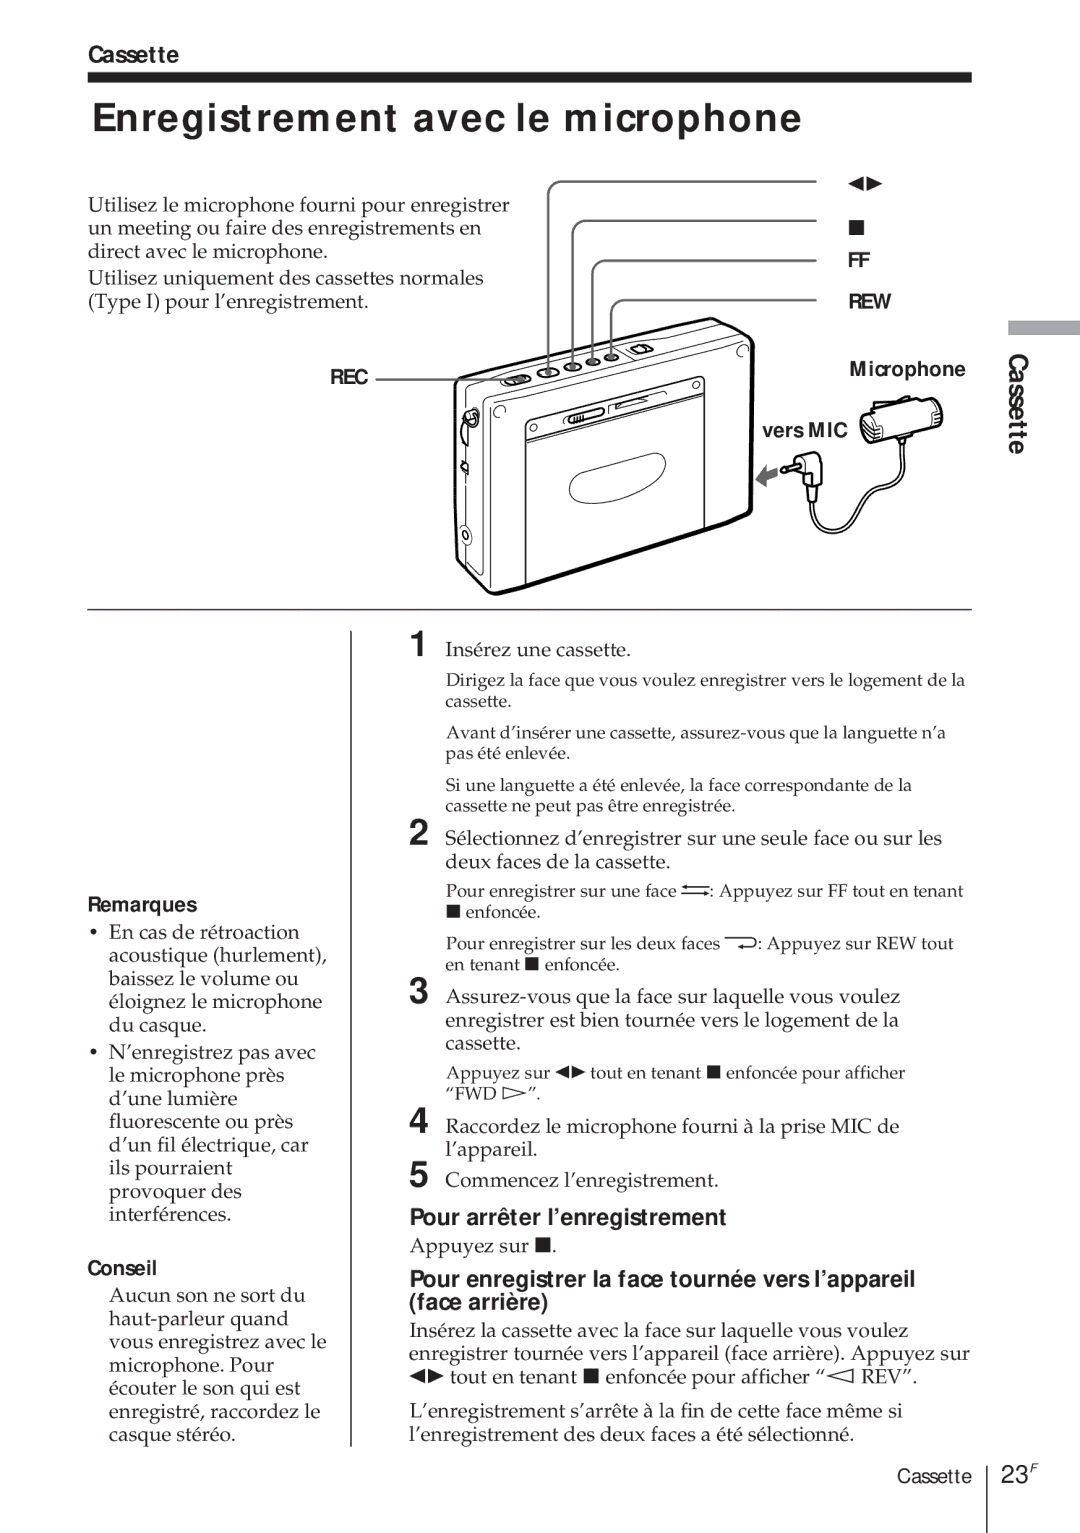 Sony ICF-SW1000TS operating instructions Enregistrement avec le microphone, 23F, Vers MIC 